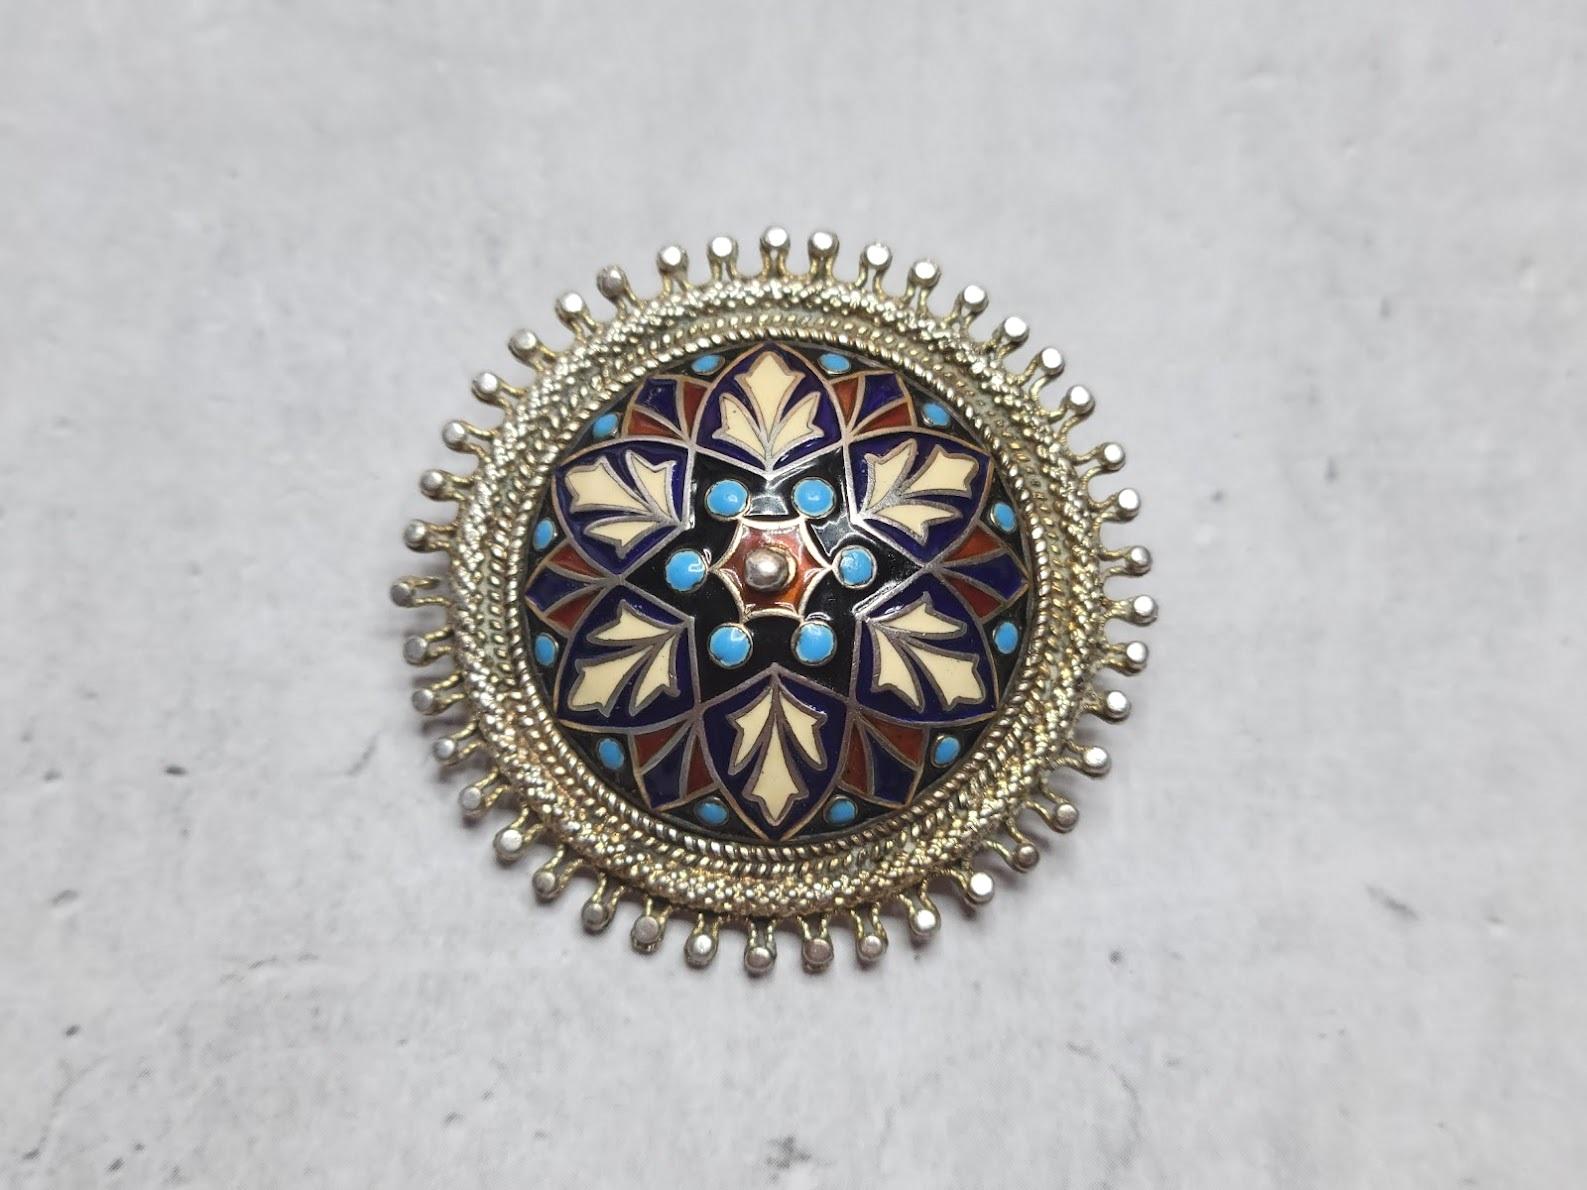 Rare antique 830 sterling silver filigree brooch with colorful enamel by the famous Norwegian craftsman Marius Hammer. Marius Hammer was born in 1847 and worked in his studio in his hometown of Bergen from 1871 to 1927. Hammer was a contemporary of